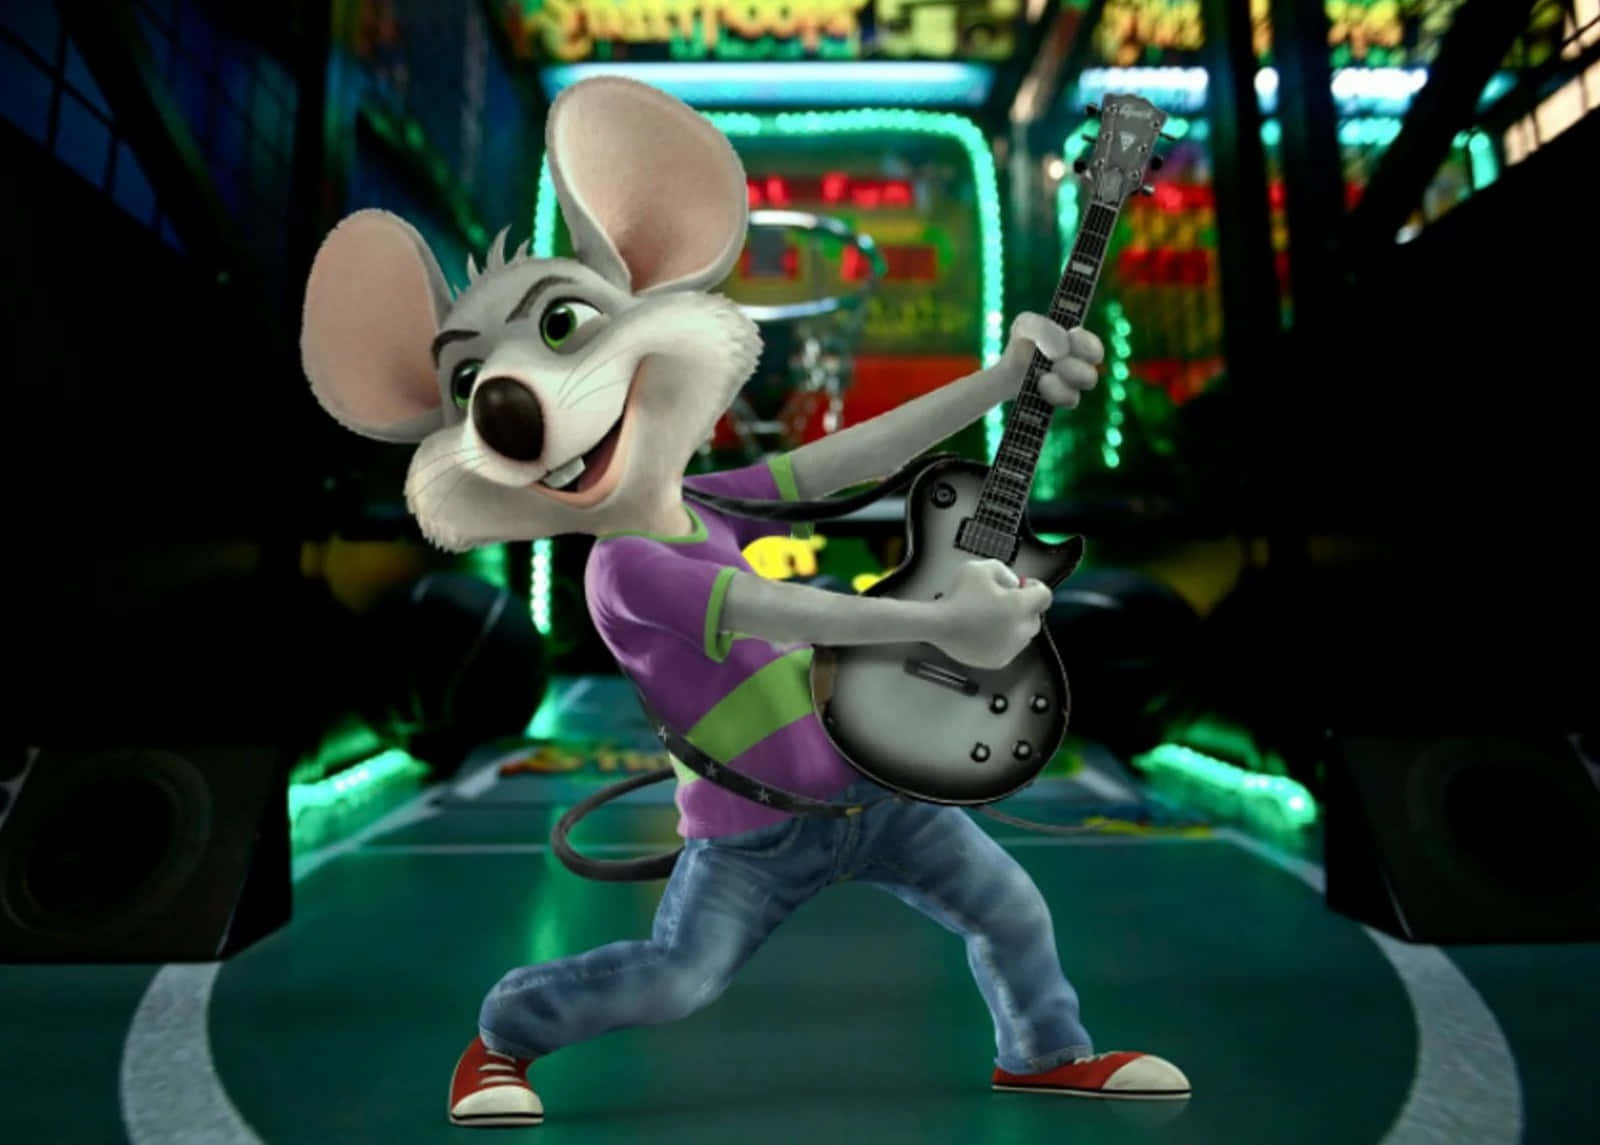 Get Ready for Hours of Fun at Chuck E Cheese!